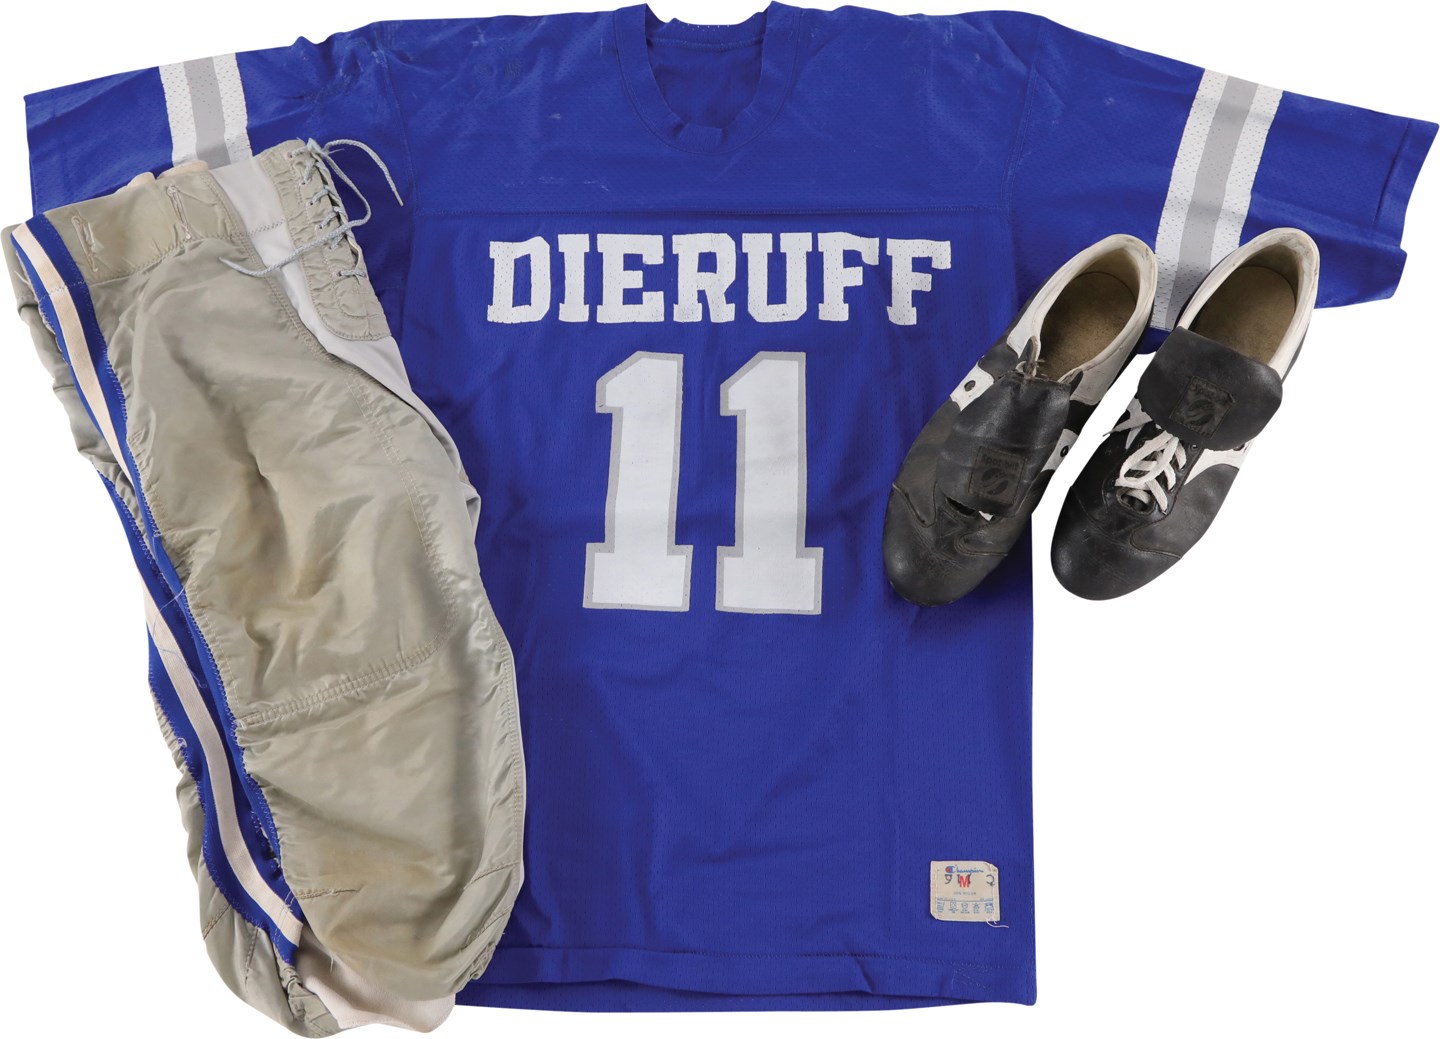 Dieruff High School Game Worn Uniform Attributed to Andre Reed